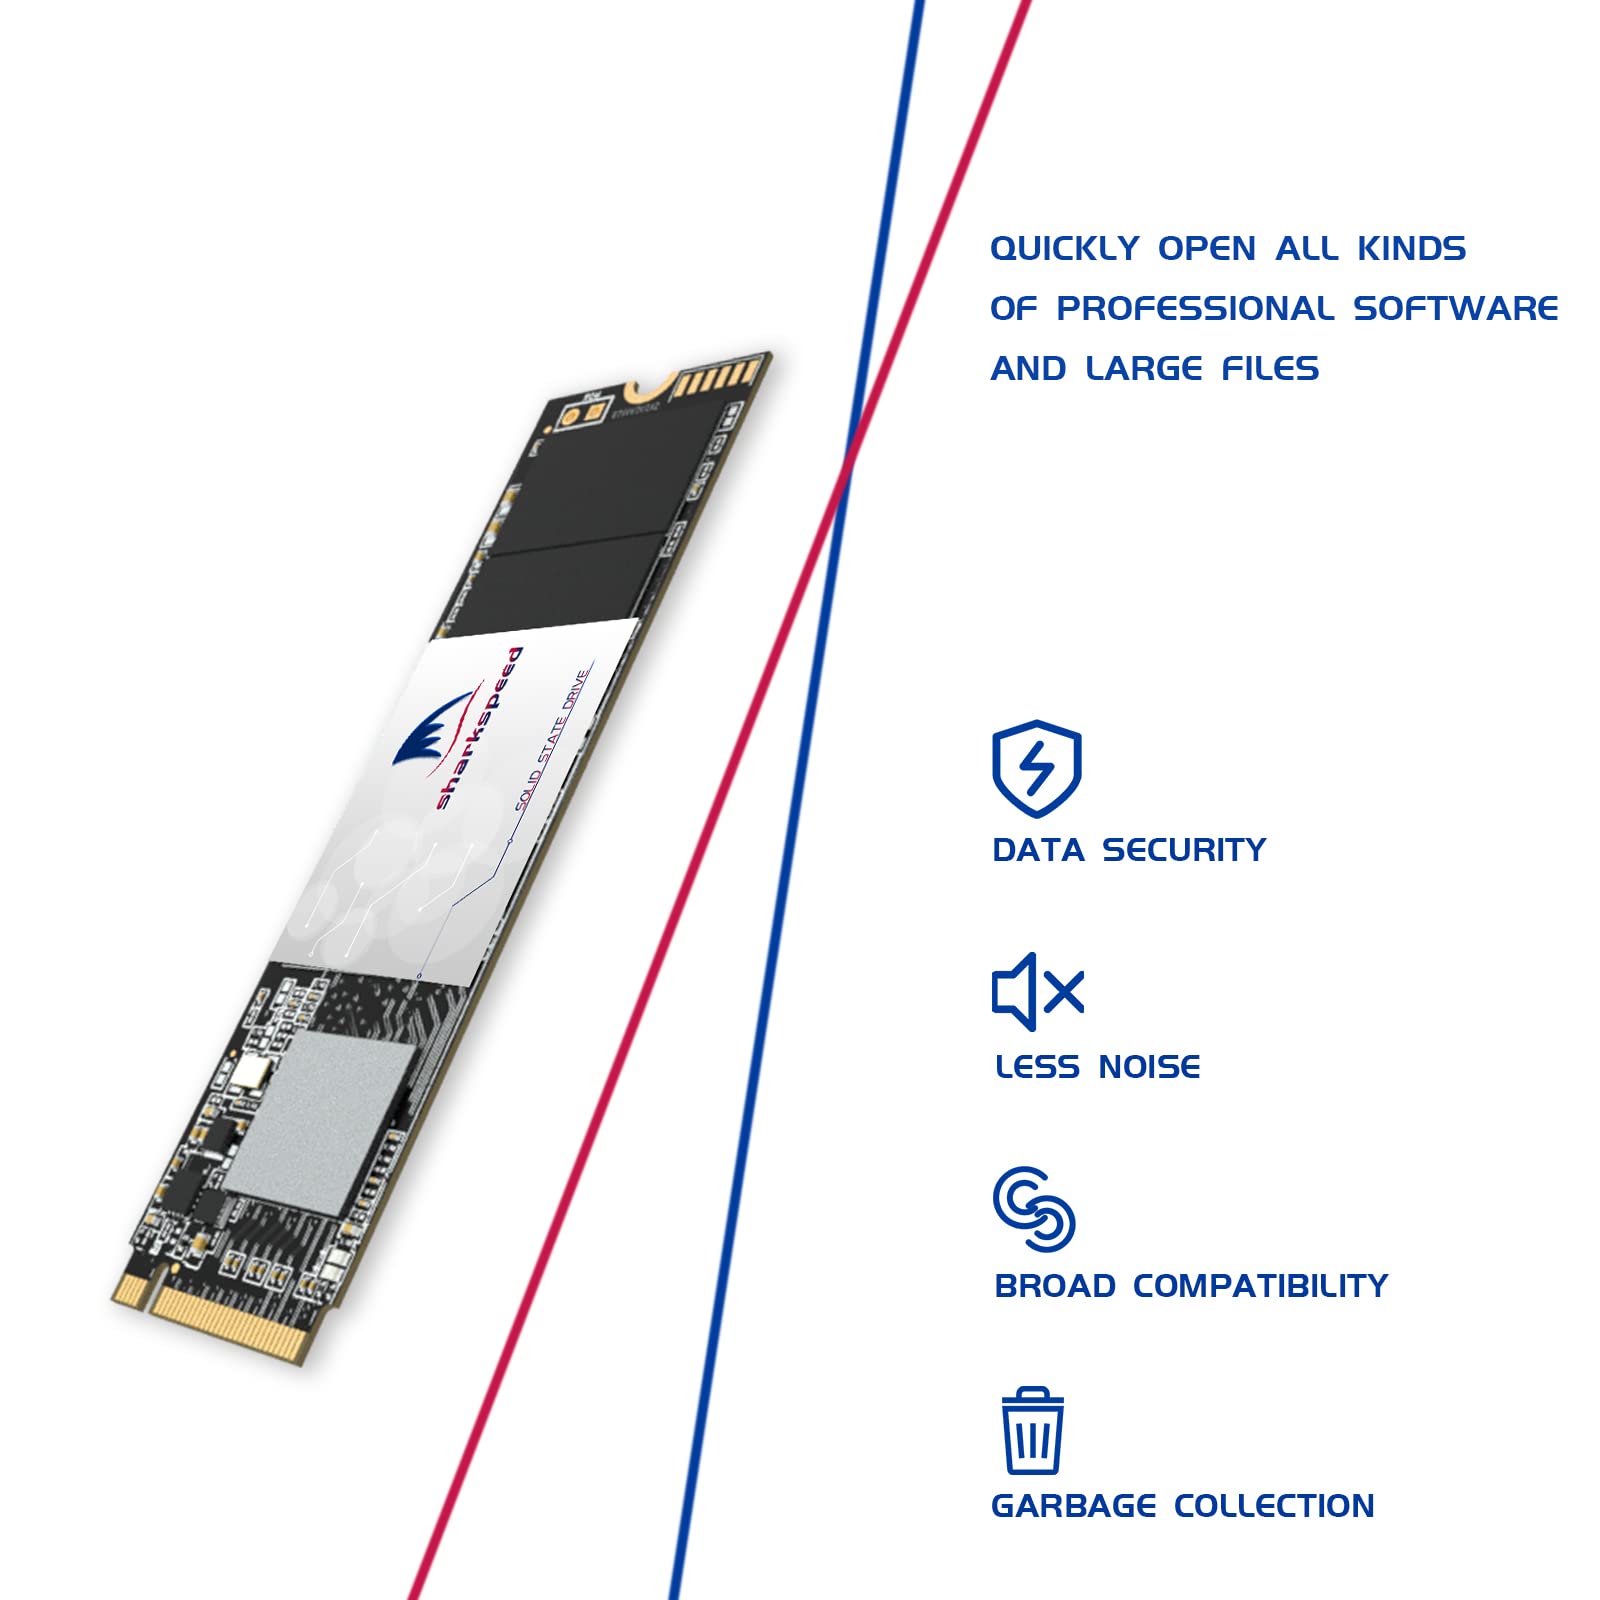 512GB SSD NVMe PCIe Gen 4 M.2 2280 SHARKSPEED Plus 3D NAND Internal High Performance Solid State Drive, TLC, PS5 Compatible，Storage for PC, Laptops, Gaming, up to 5,500MB/s (512GB, M.2 PCIe)